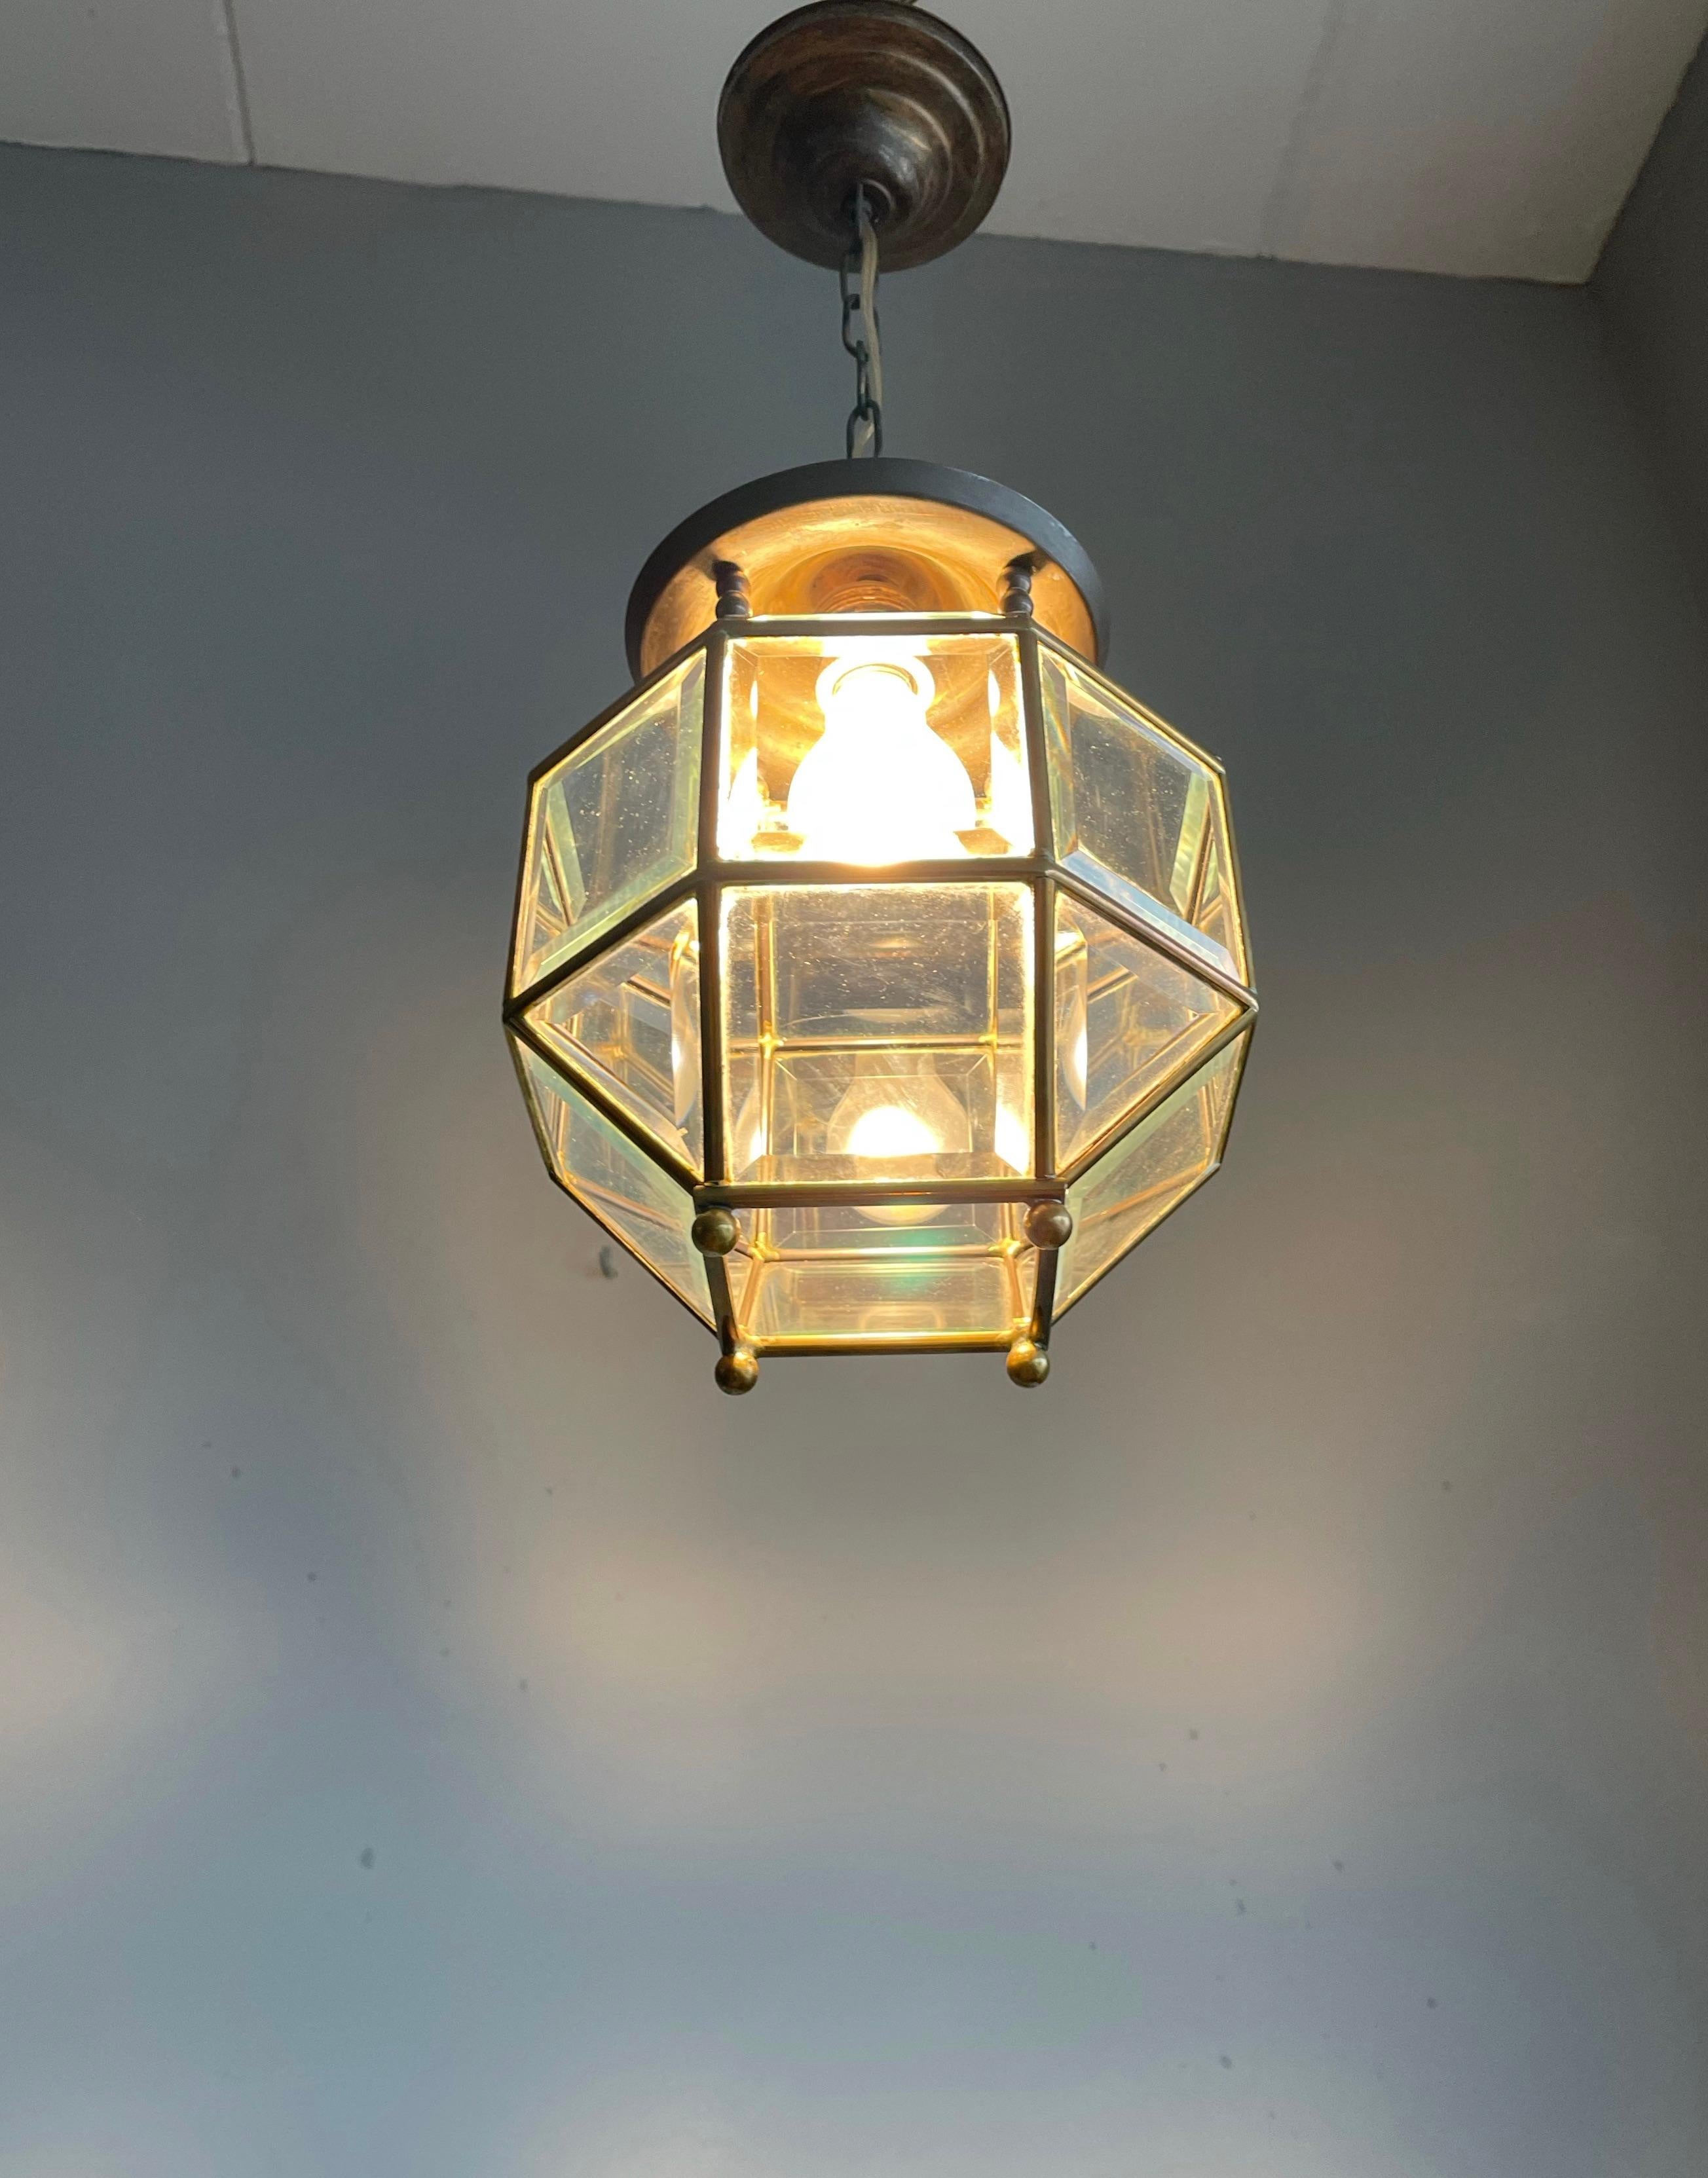 Early 1900s Beveled Glass and Brass Pendant Cubic Adolf Loos Style Ceiling Light 9